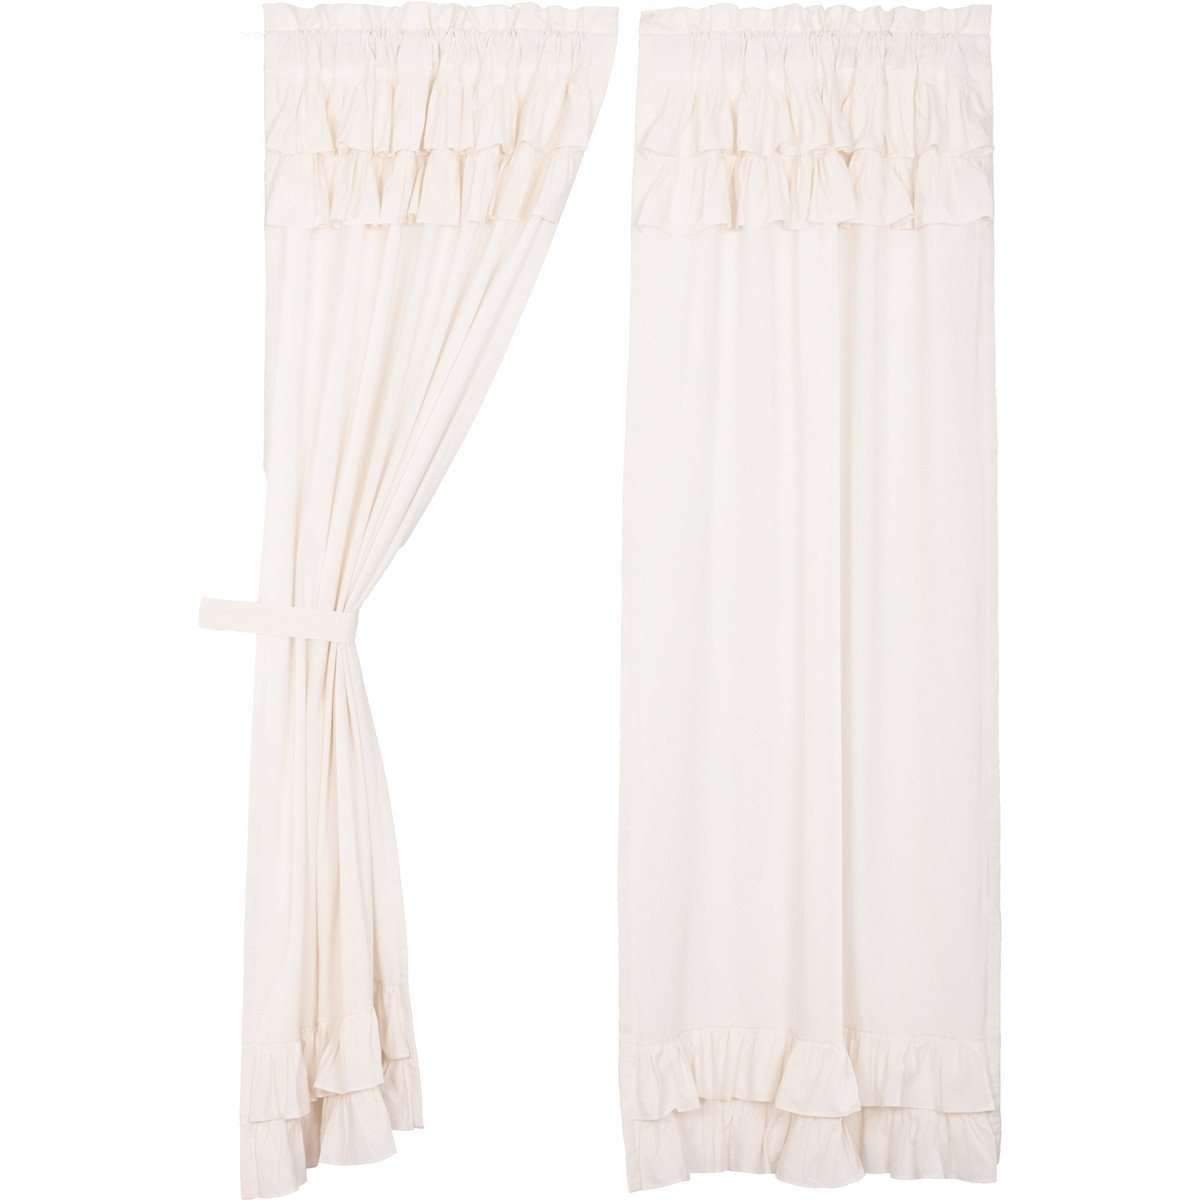 Simple Life Flax Antique White Ruffled Panel Country Curtain Set of 2 84"x40" - The Fox Decor